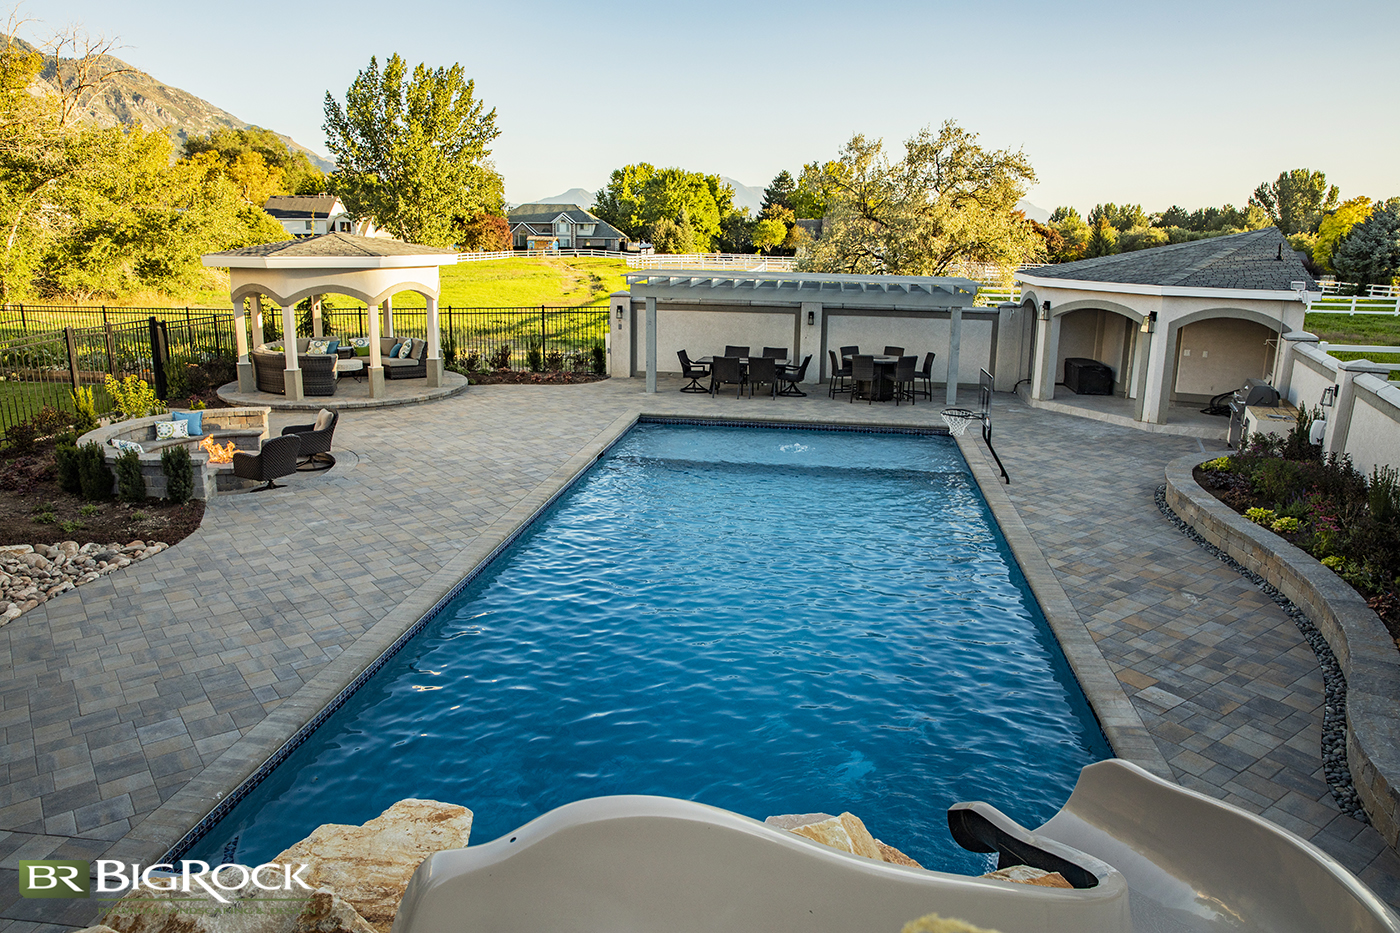 Installing a pool in your backyard doesn't have to take up all of your landscaping design. Create outdoor living spaces and gardens around your backyard pool for a complete landscaping design you can enjoy even when you aren't swimming.